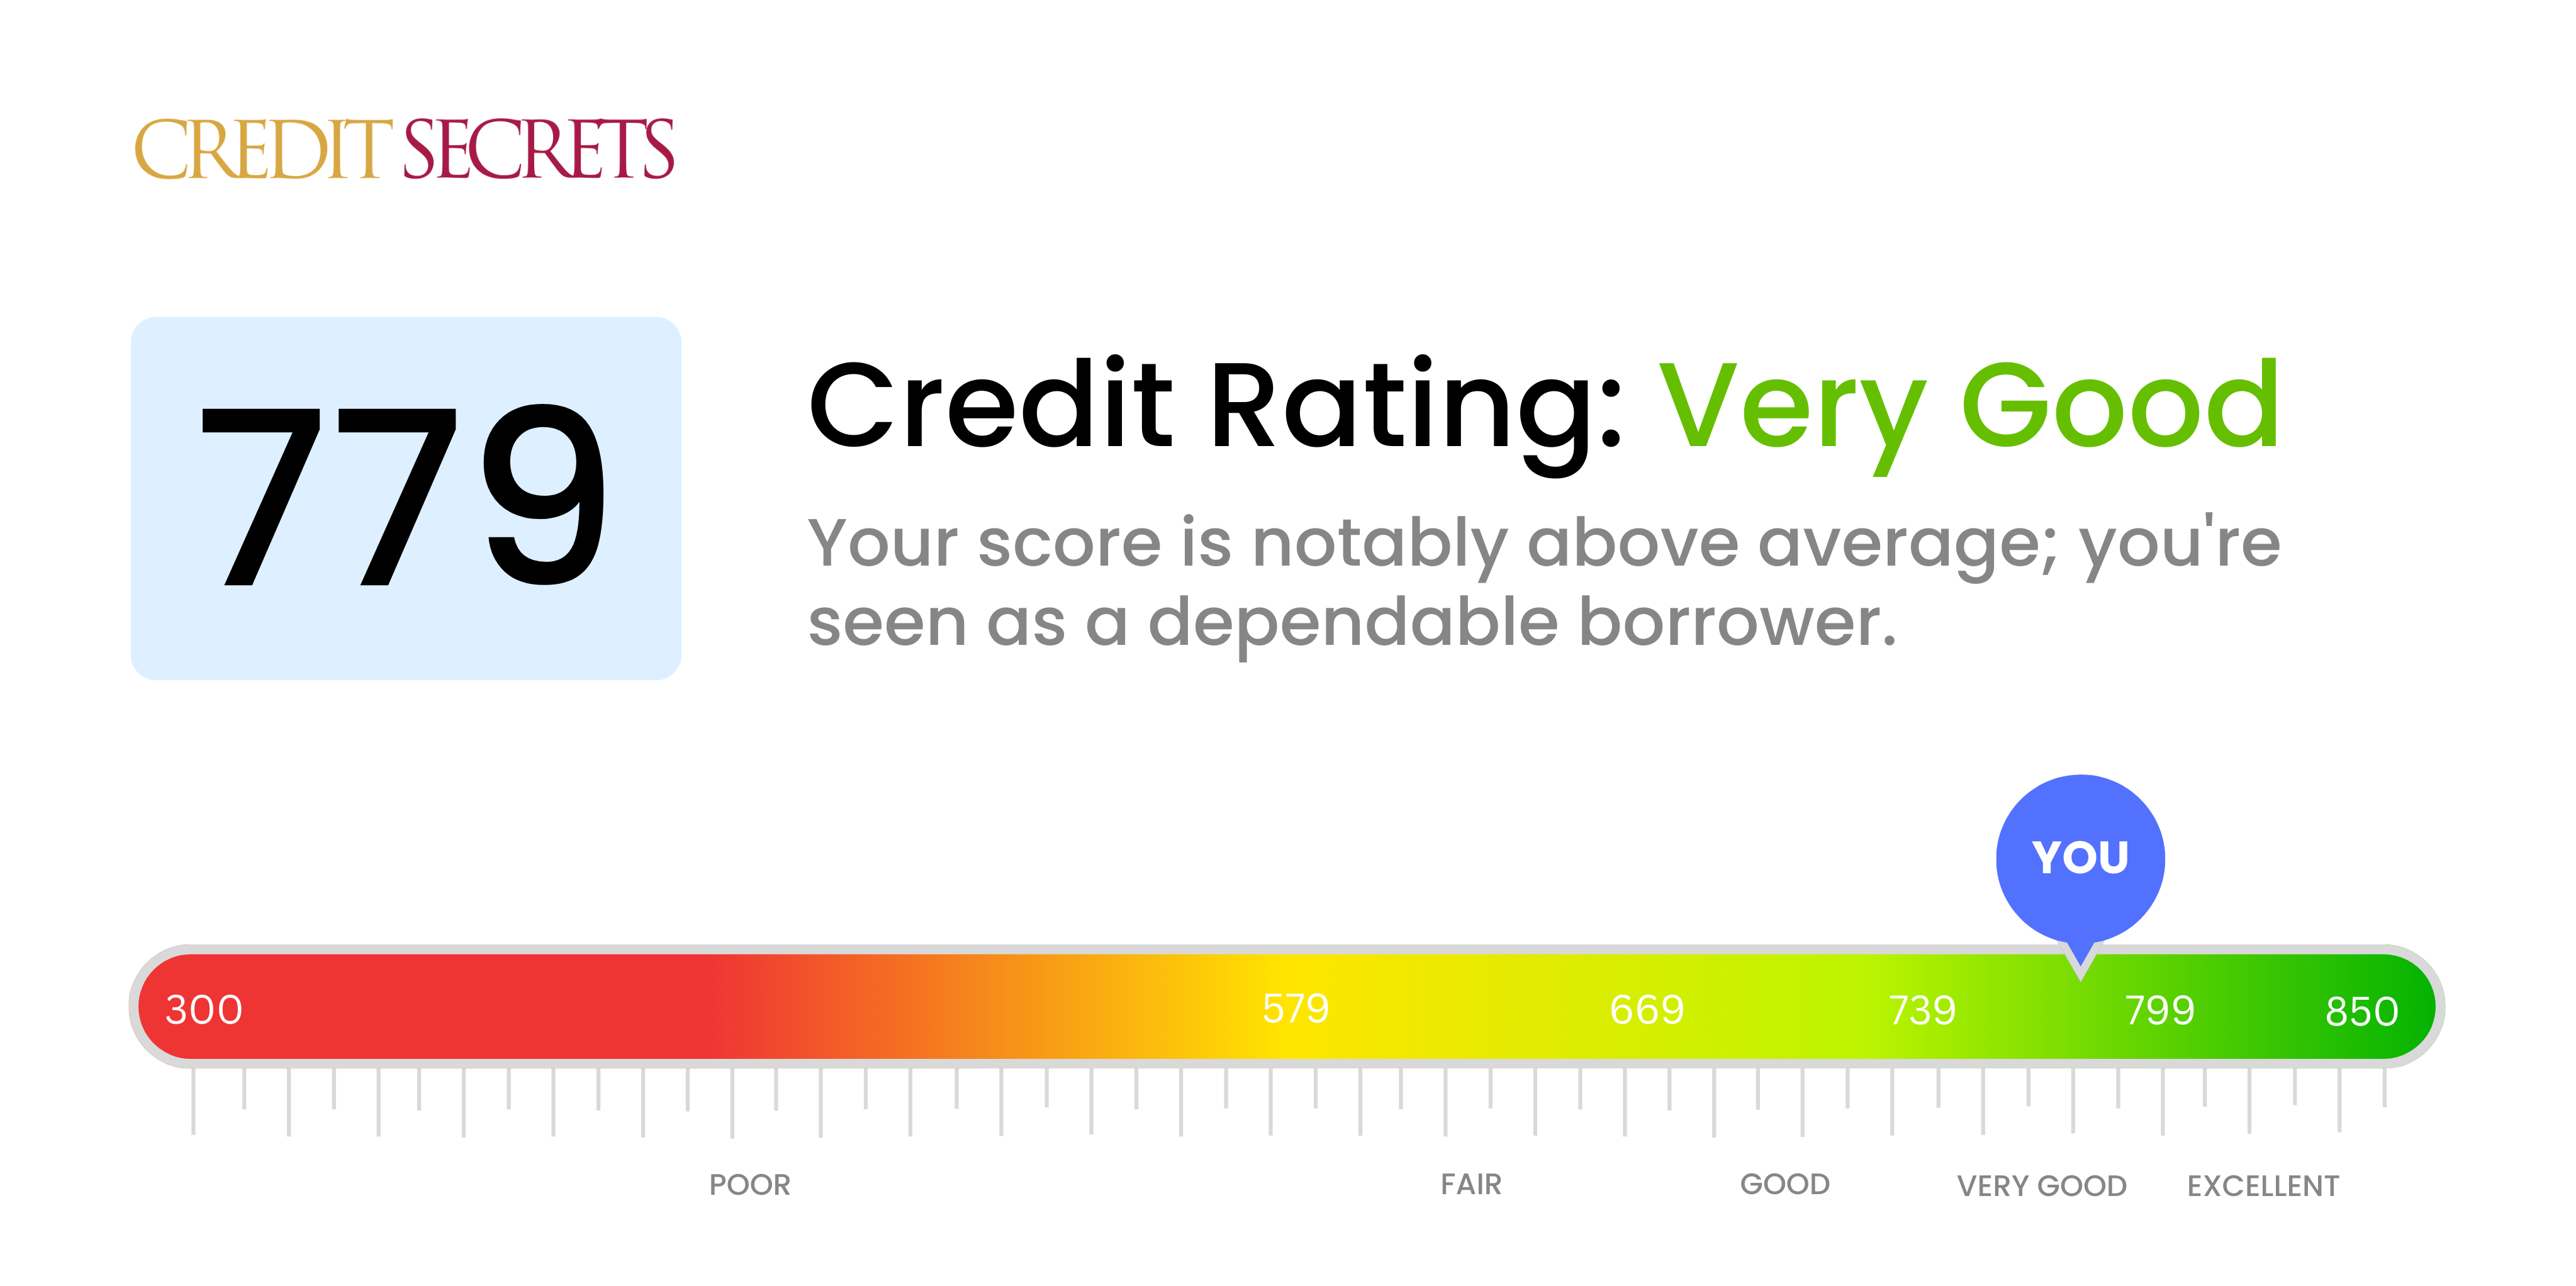 Is 779 a good credit score?